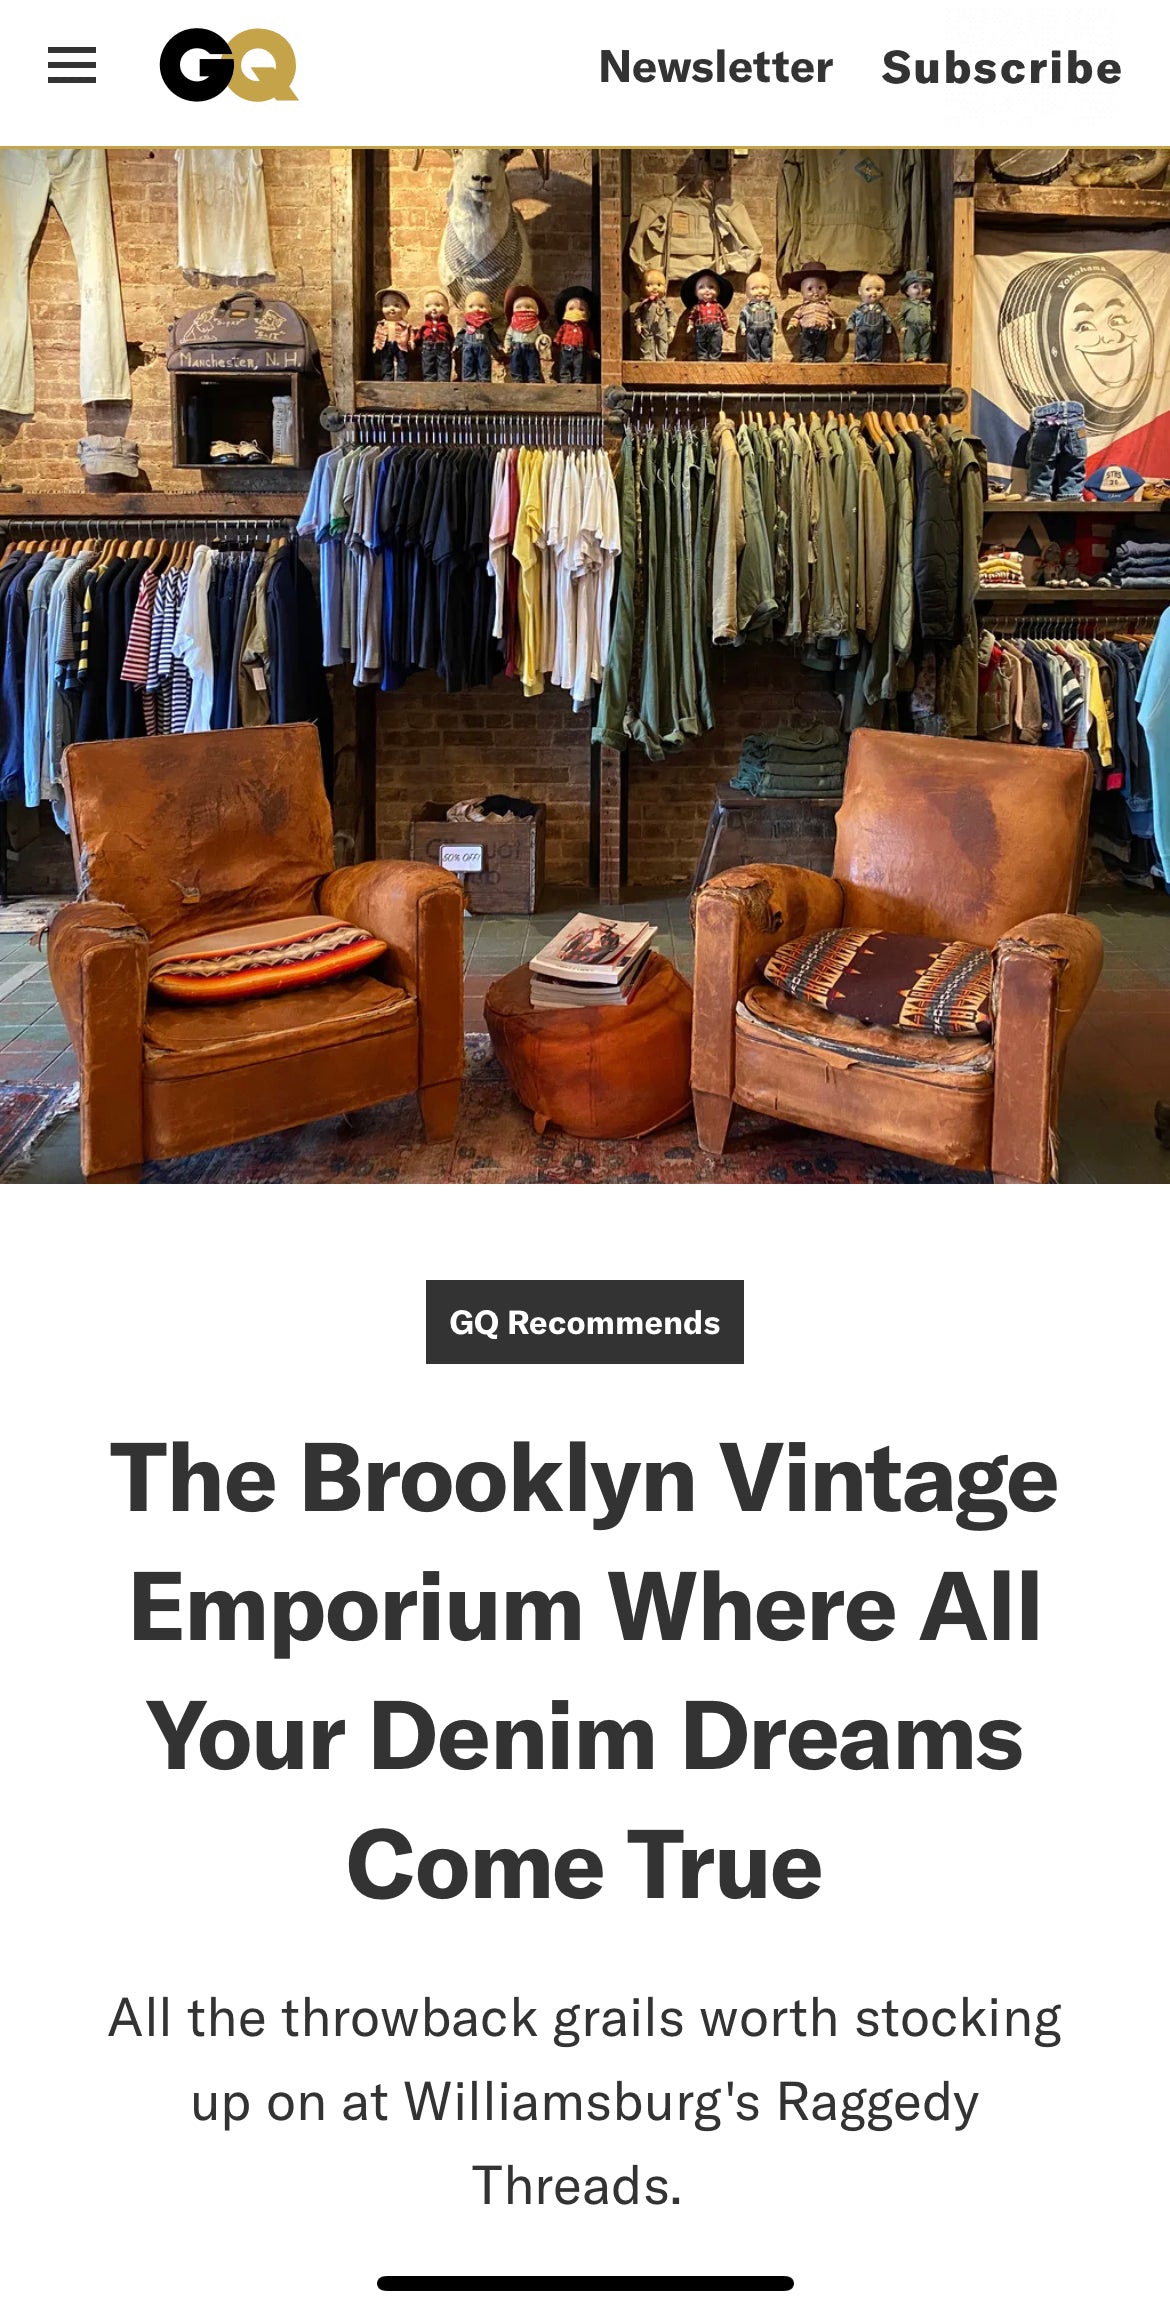 GQ Recommends article: The Brooklyn Vintage Emporium Where All Your Denim Dreams Come True. All the throwback grails at Williamsburg's Raggedy Threads